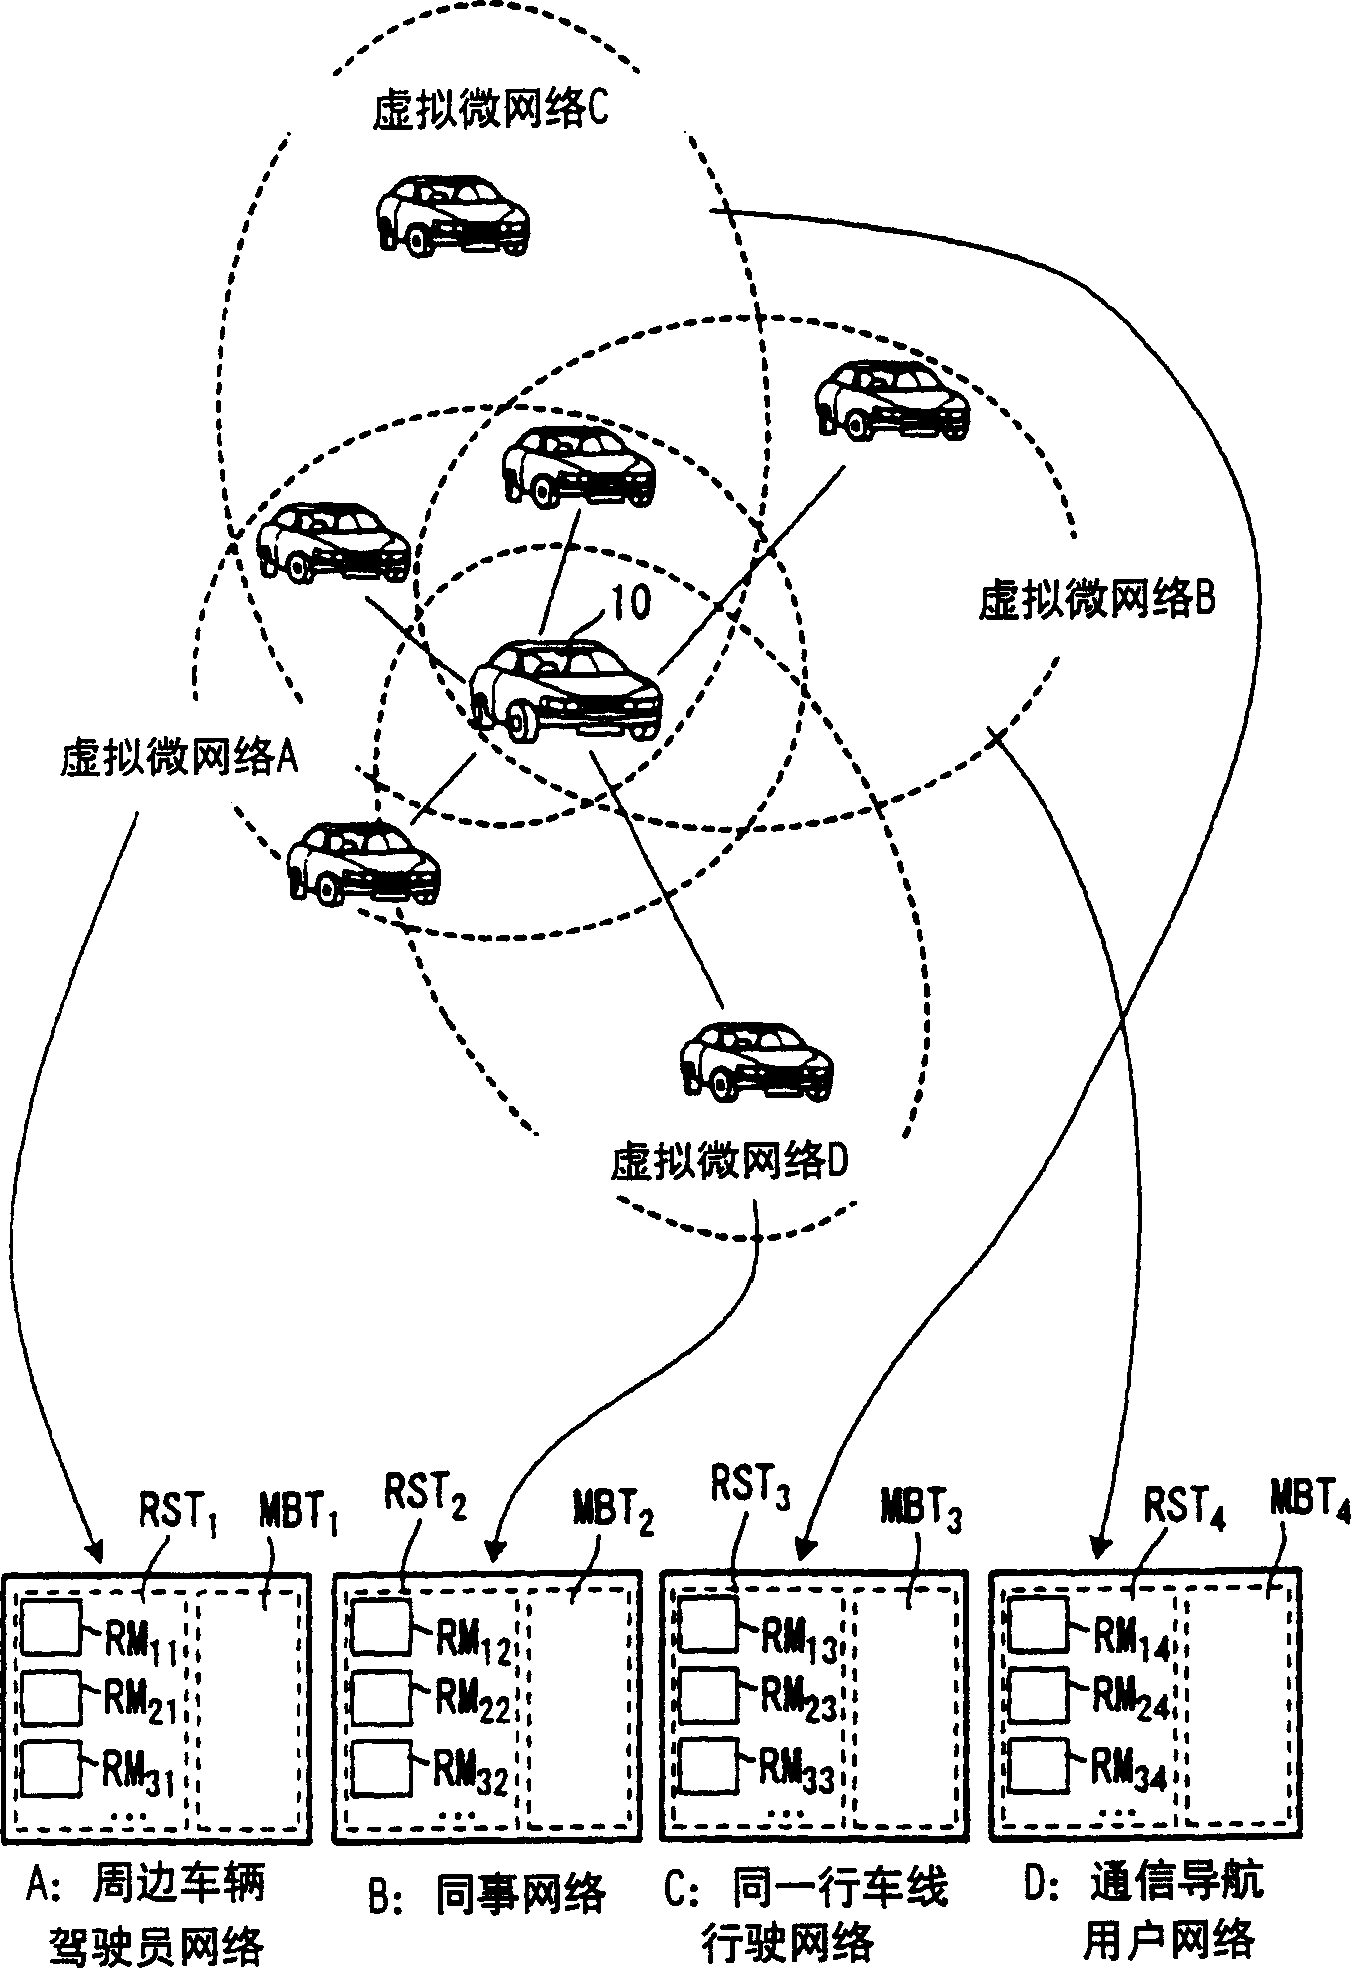 Communicating method for inter-movingbodies and vehicle communicating apparatus